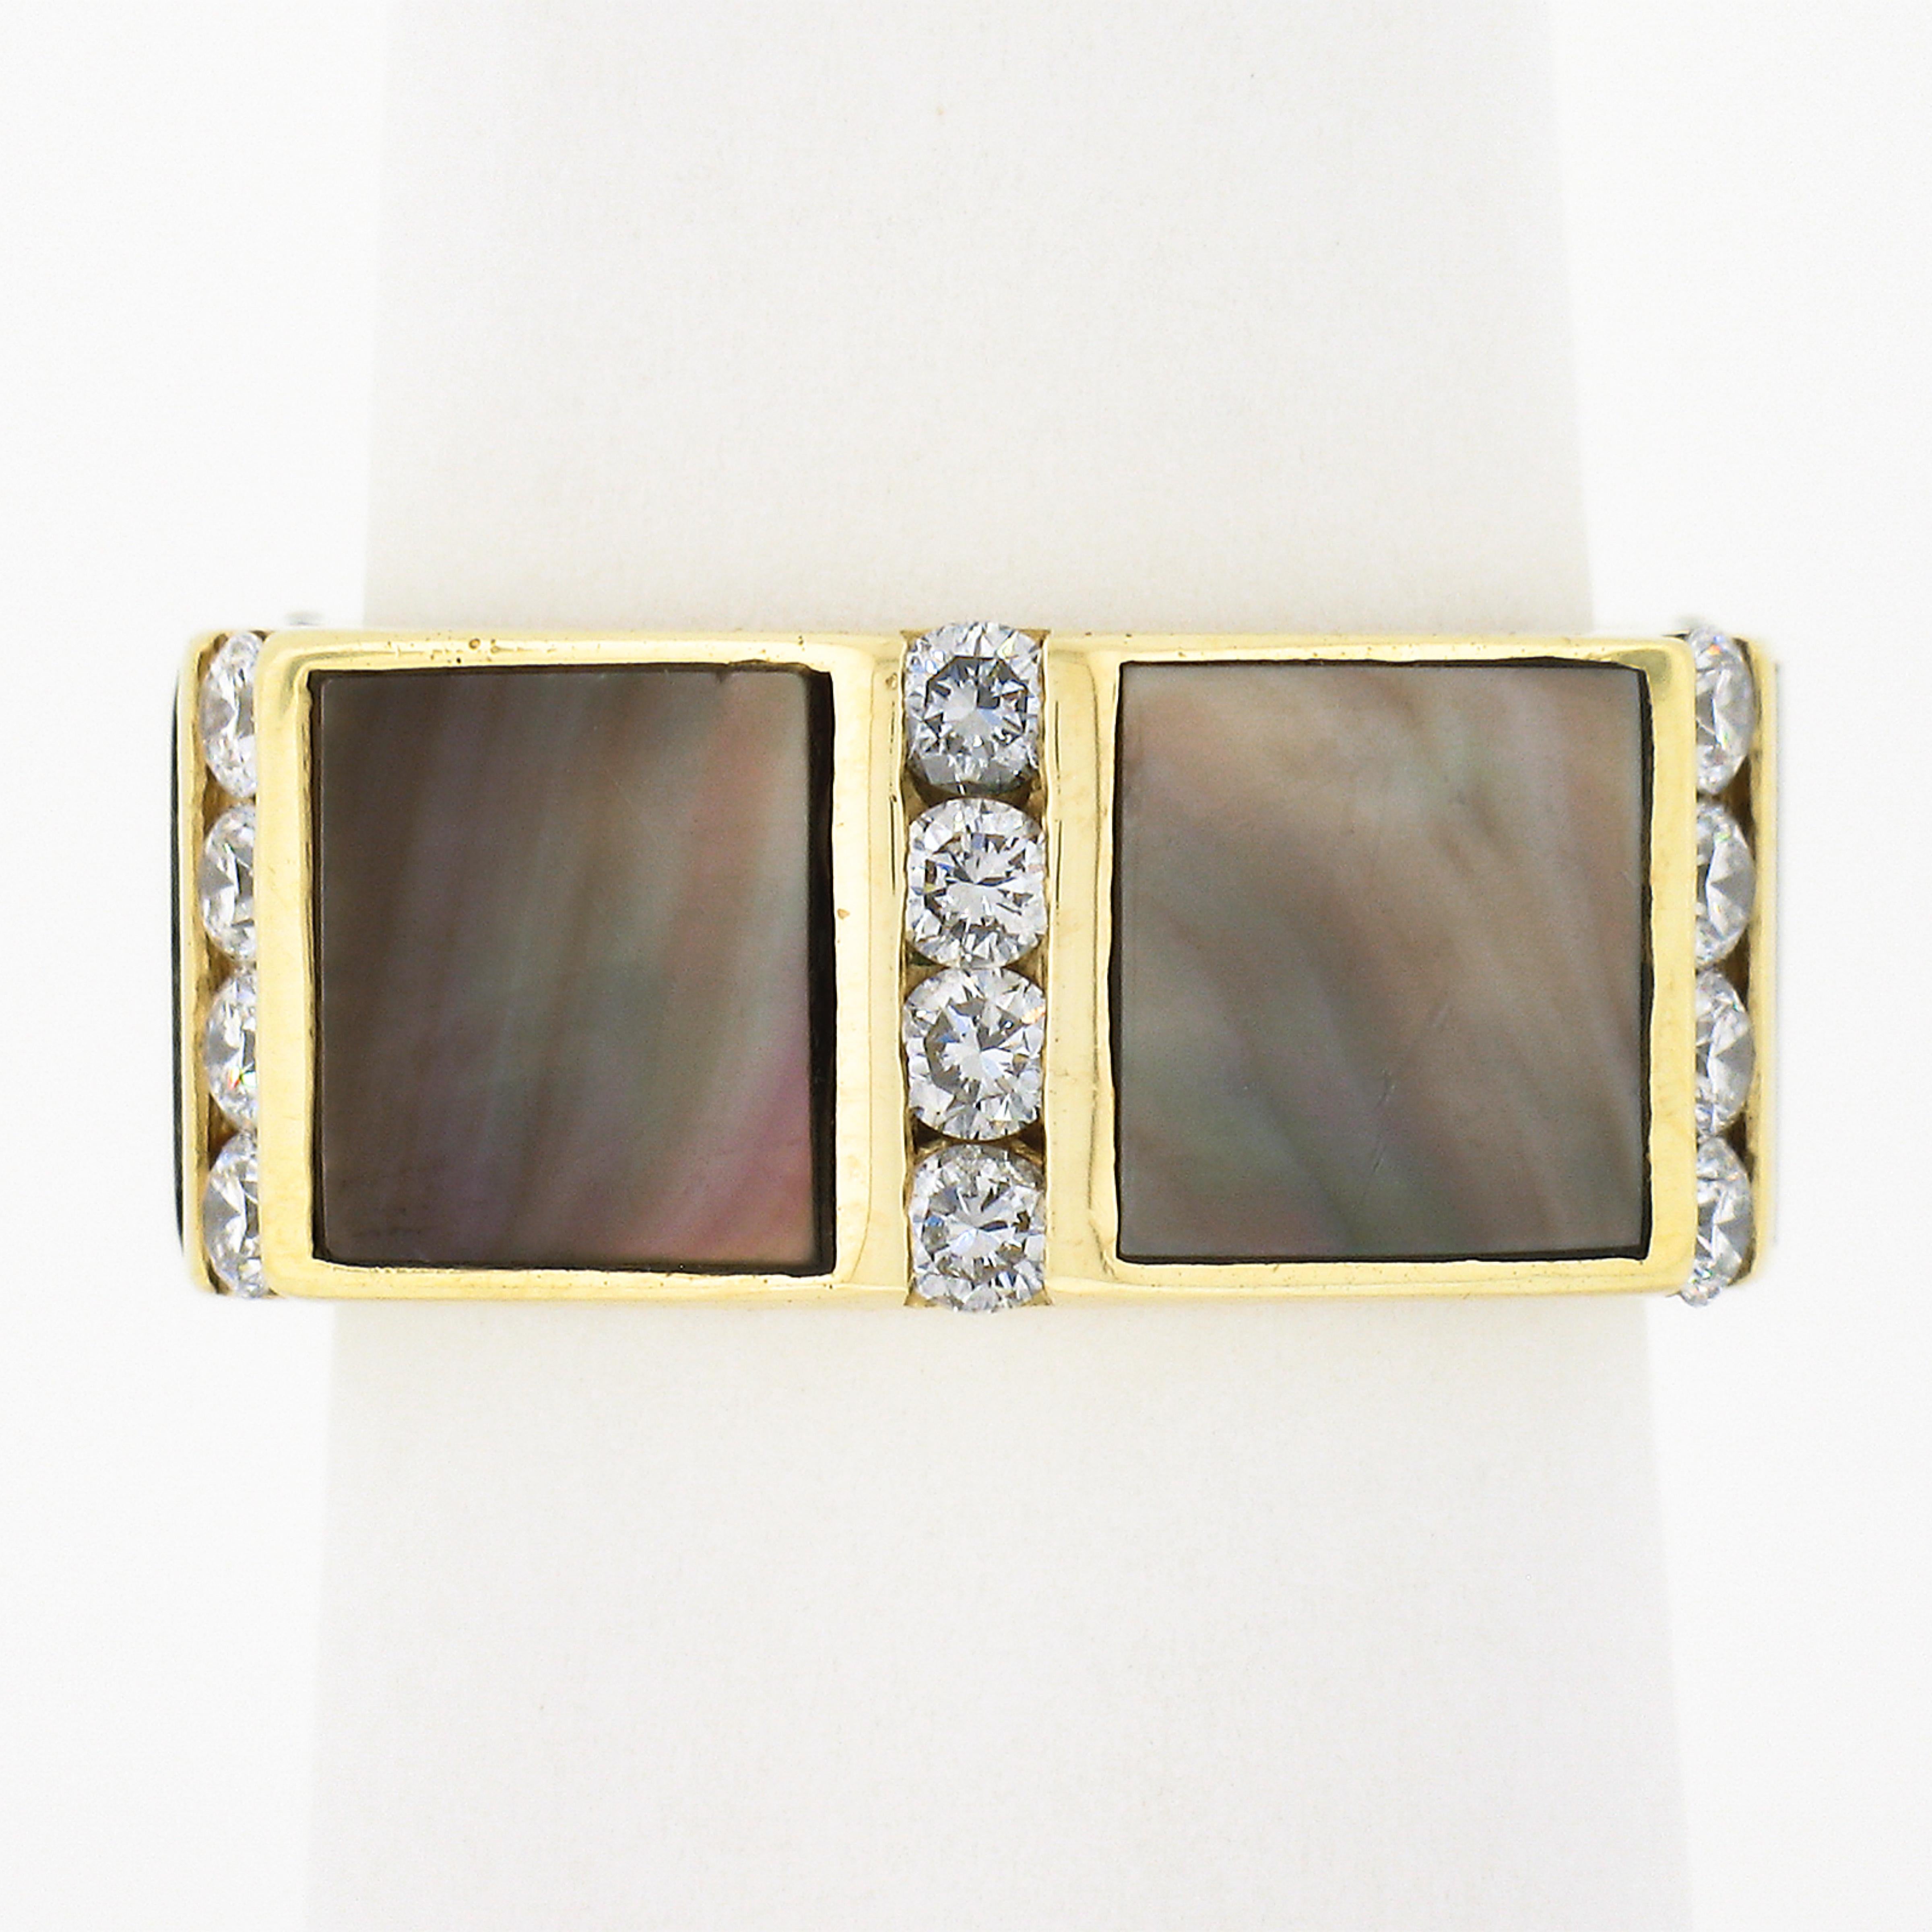 This well made vintage band ring is crafted in solid 18k yellow gold and features a wide eternity design set with beautiful black mother of pearl and diamonds entirely around the band. The mother of pearl have a custom square cut that allows them to